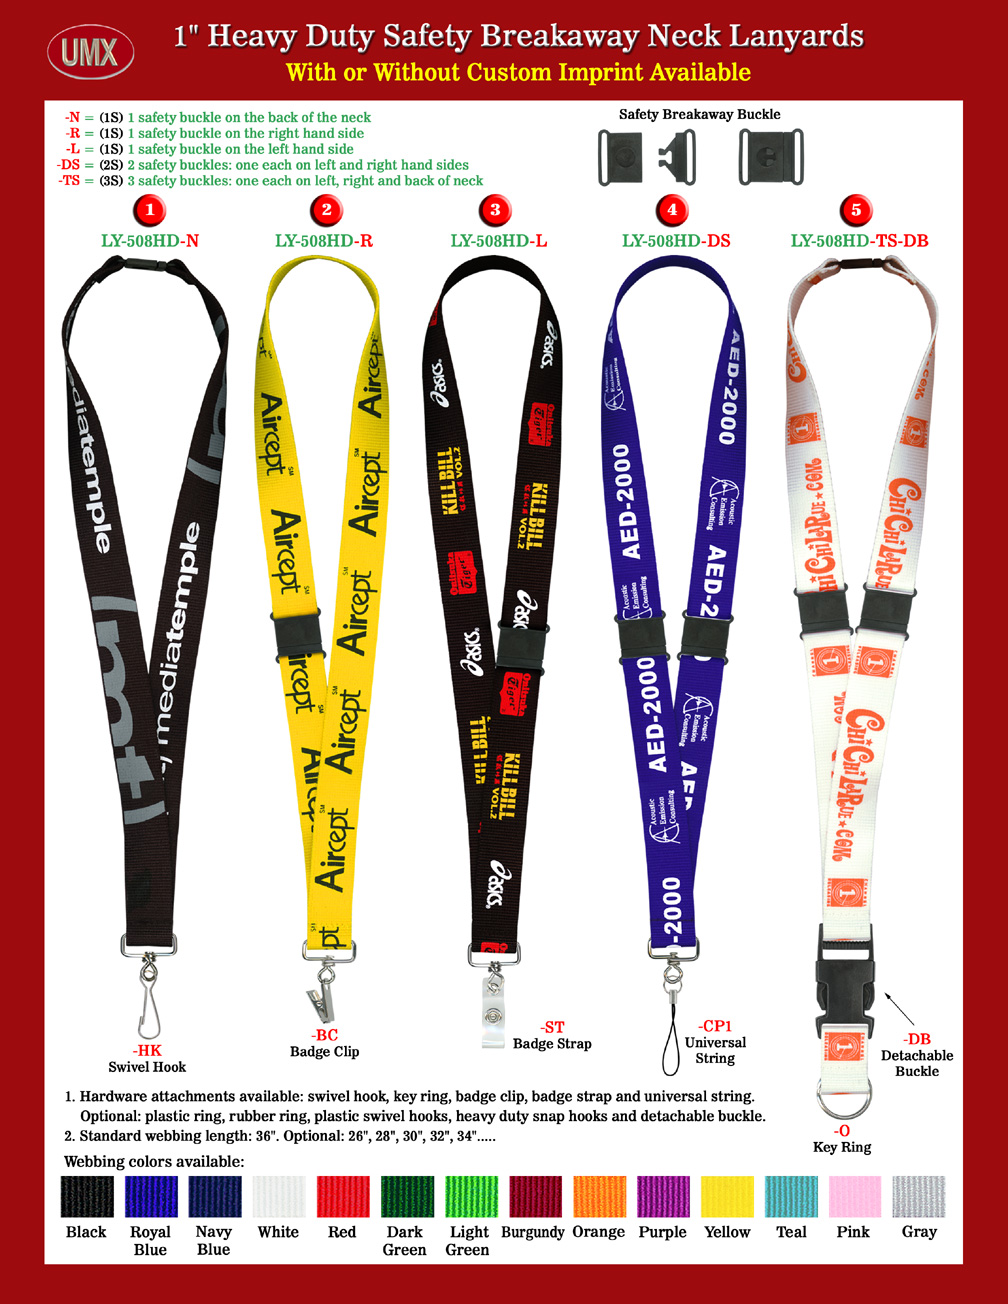 1" LY-508HD Super Large Heavy Duty Safety Breakaway ID Card Lanyards.